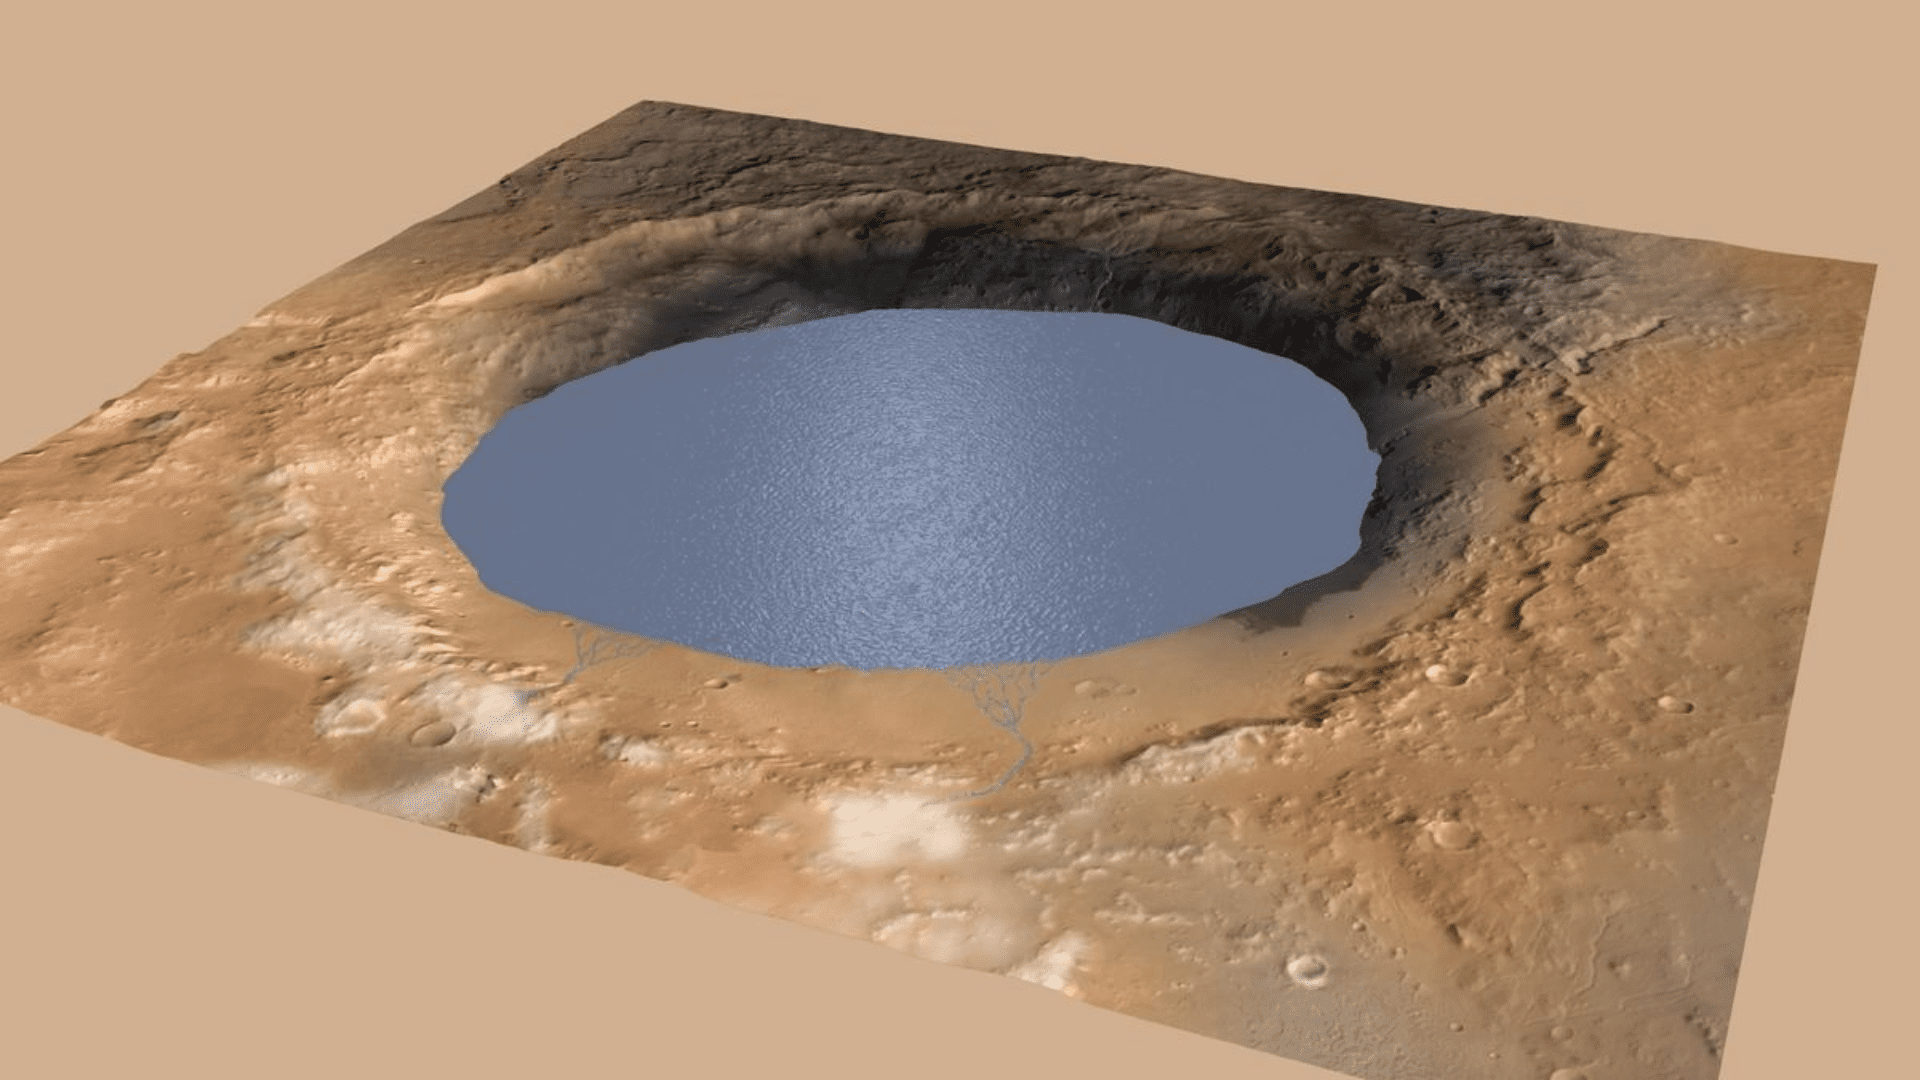 Gale Crater on Mars 